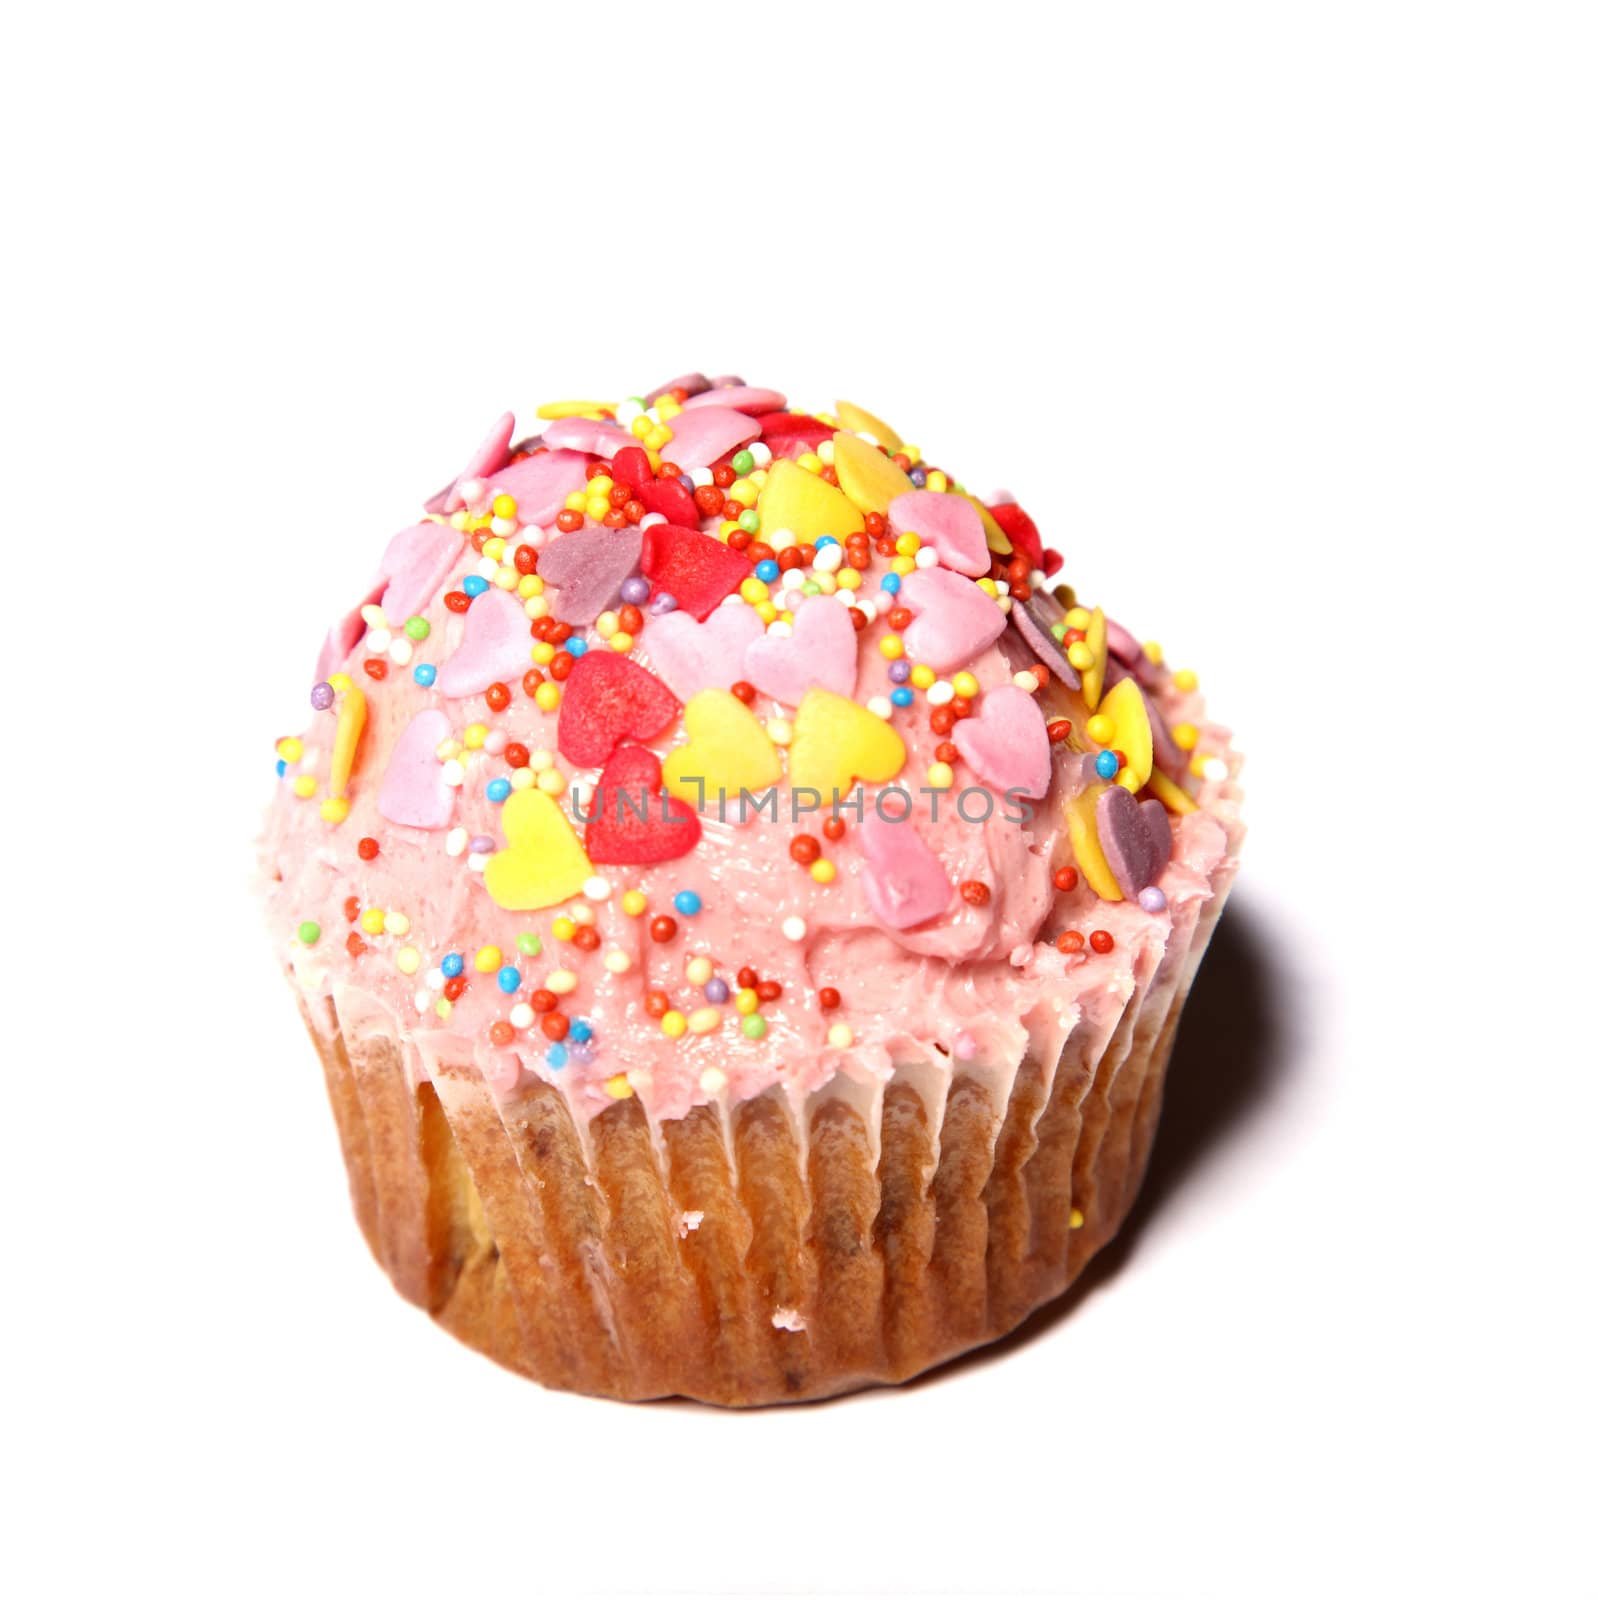 Pink Cupcake - homemade - on a white background - square